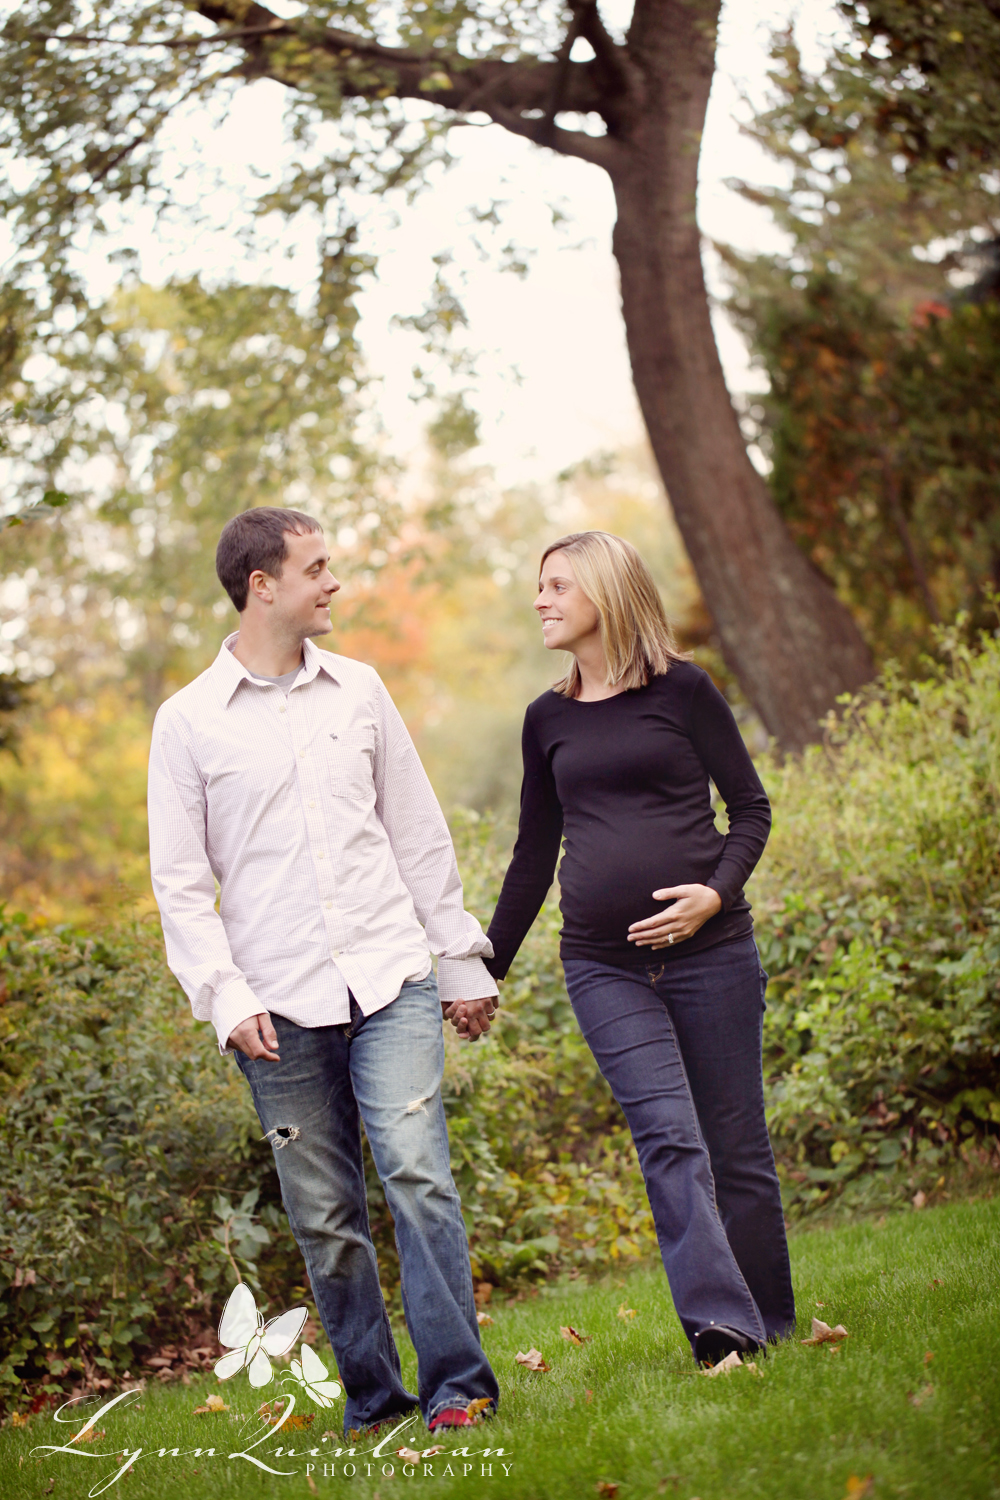 9 Photos of Outside Maternity Photography